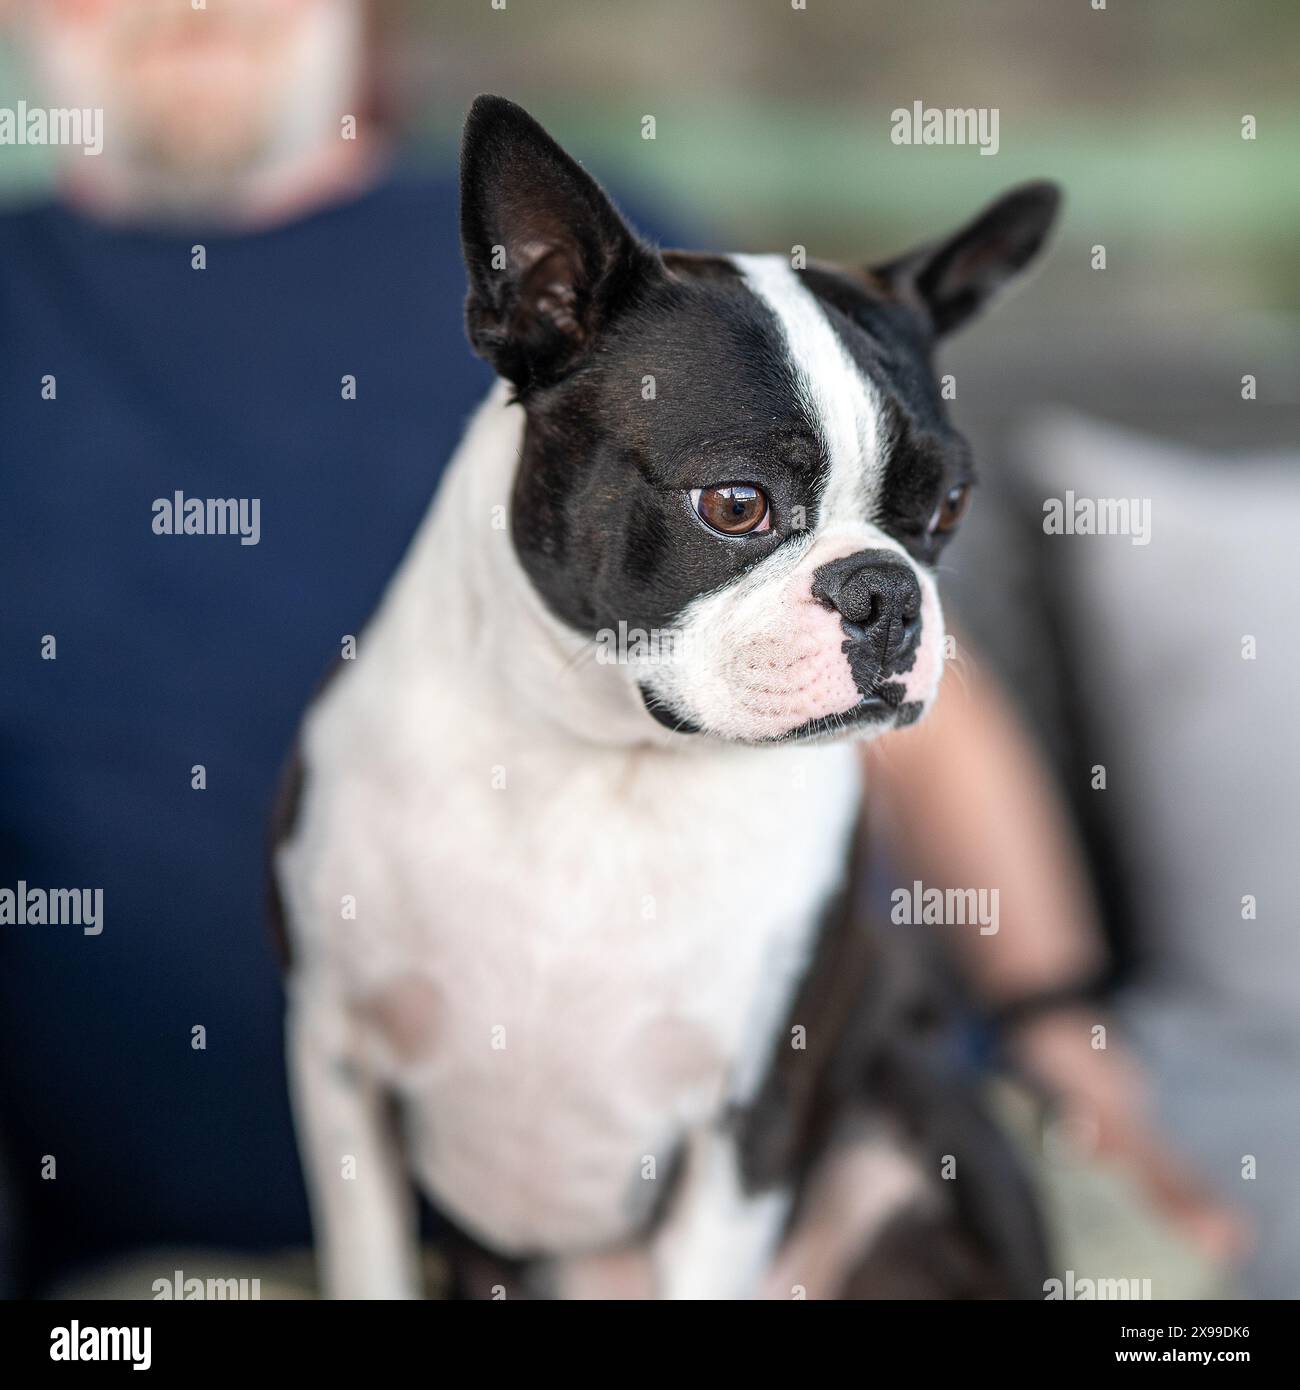 Three-year-old Boston terrier seated in couch Stock Photo